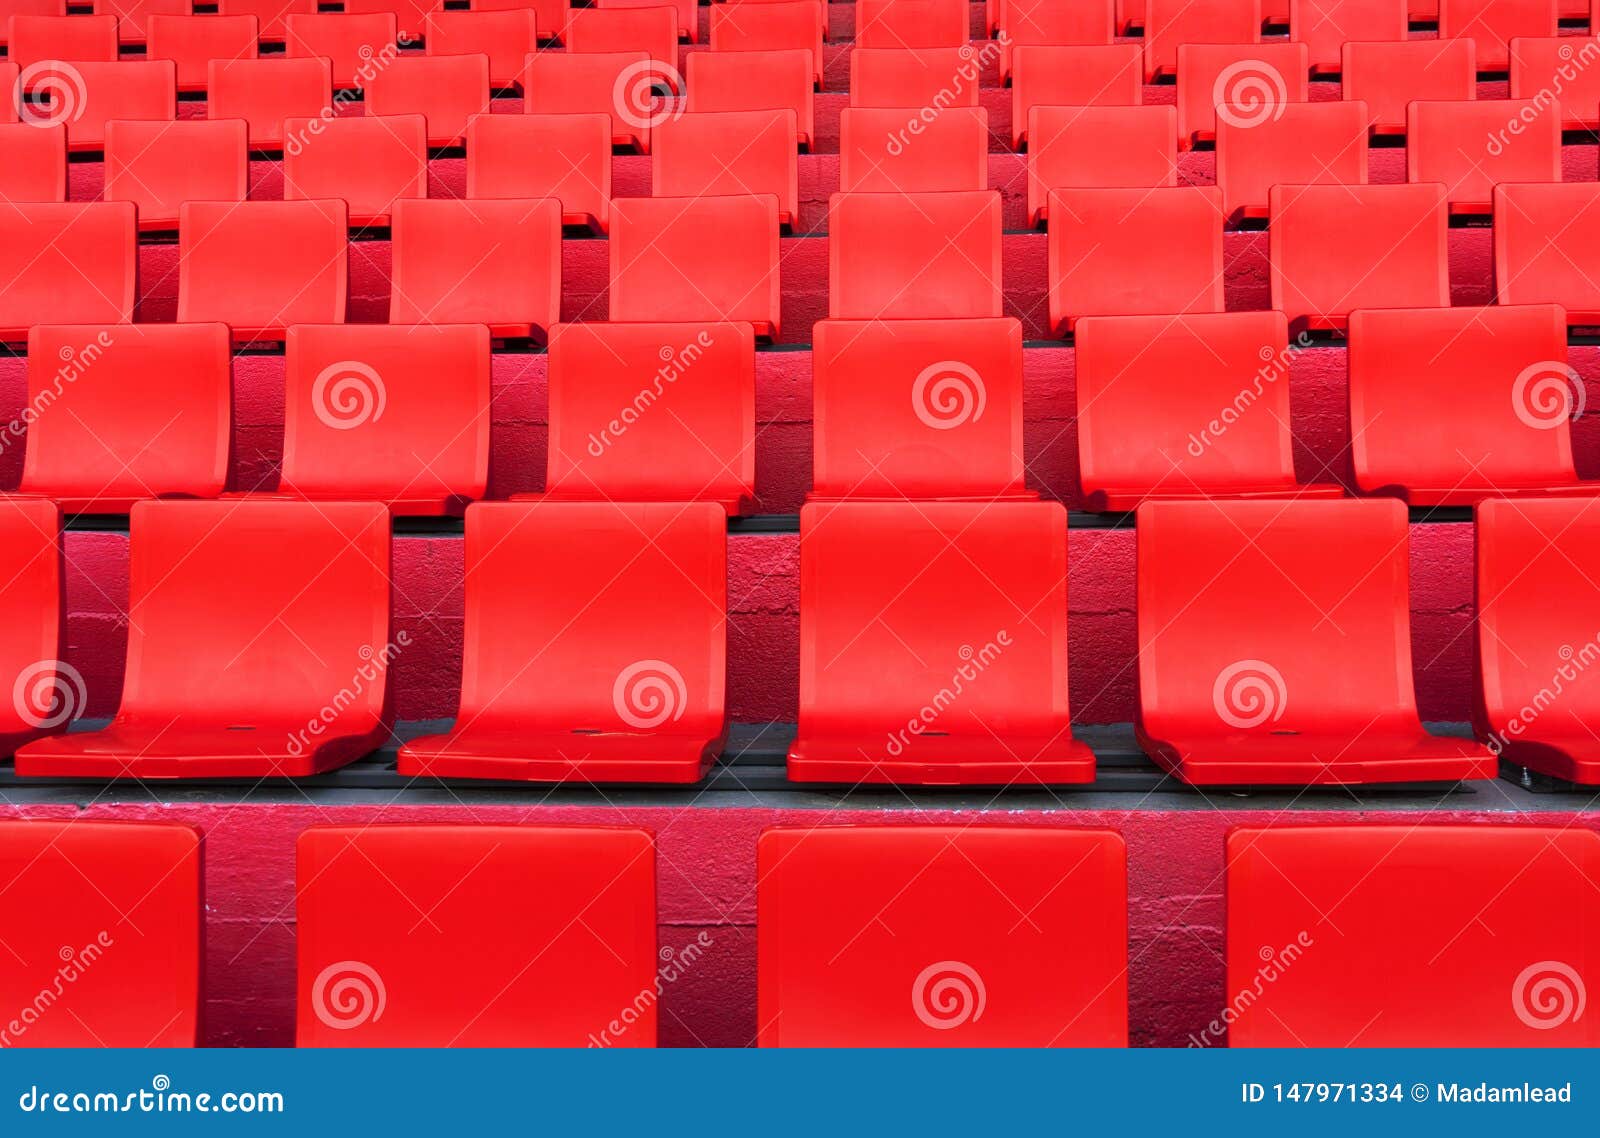 Rows of Red Seat Pattern in Football or Soccer Sport Stadium Stock ...